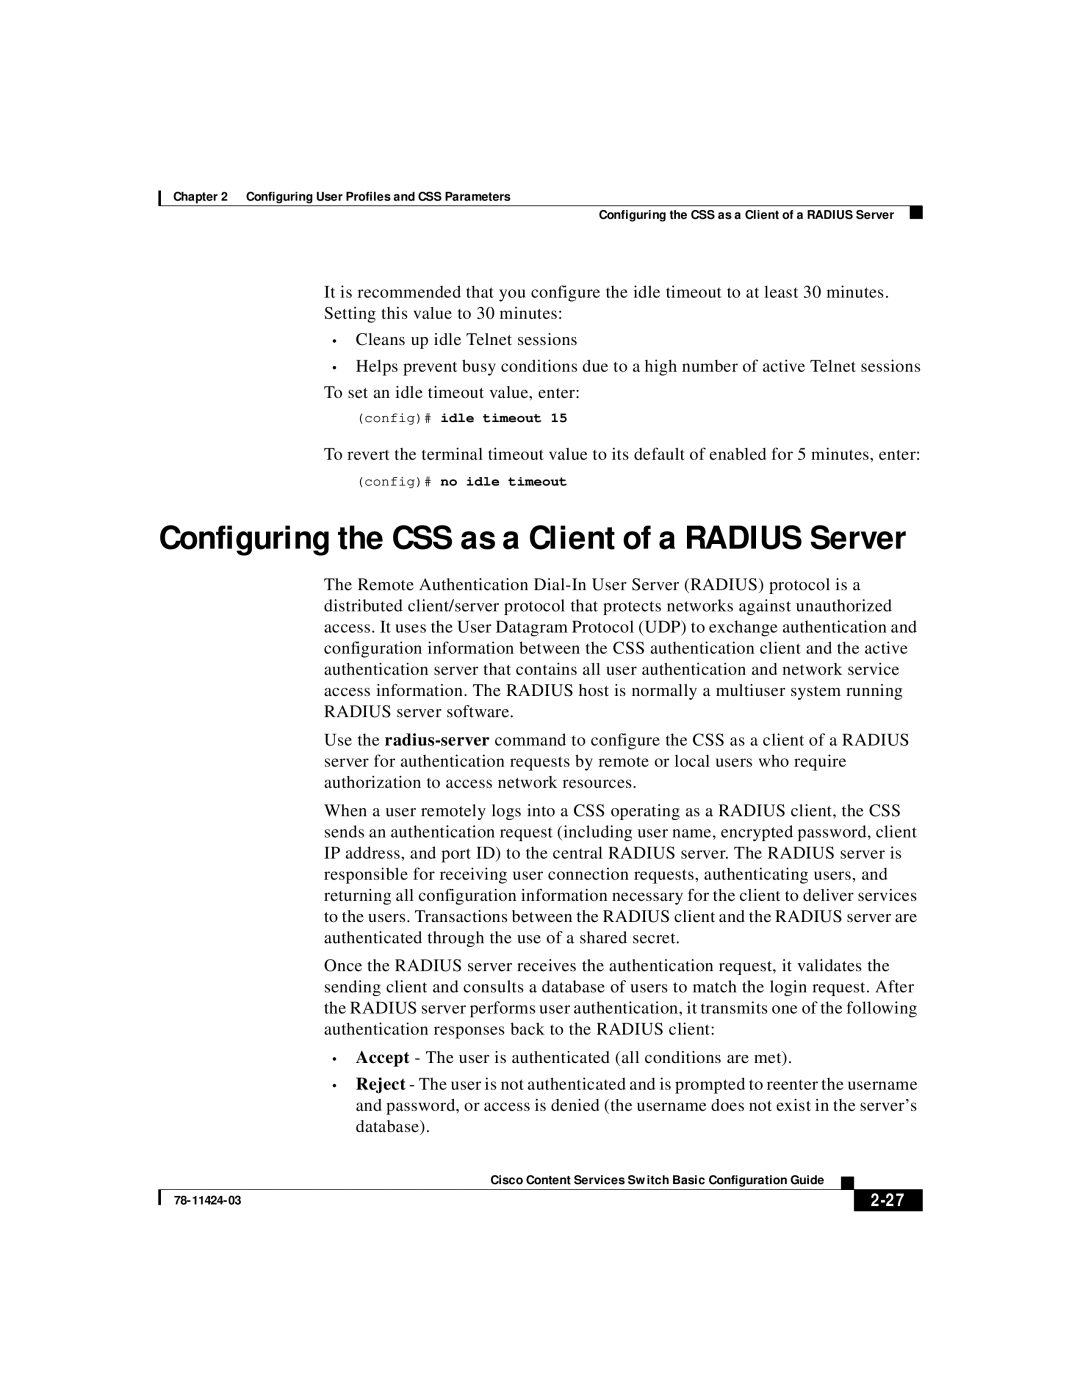 Cisco Systems 78-11424-03 manual Configuring the CSS as a Client of a RADIUS Server, 2-27 